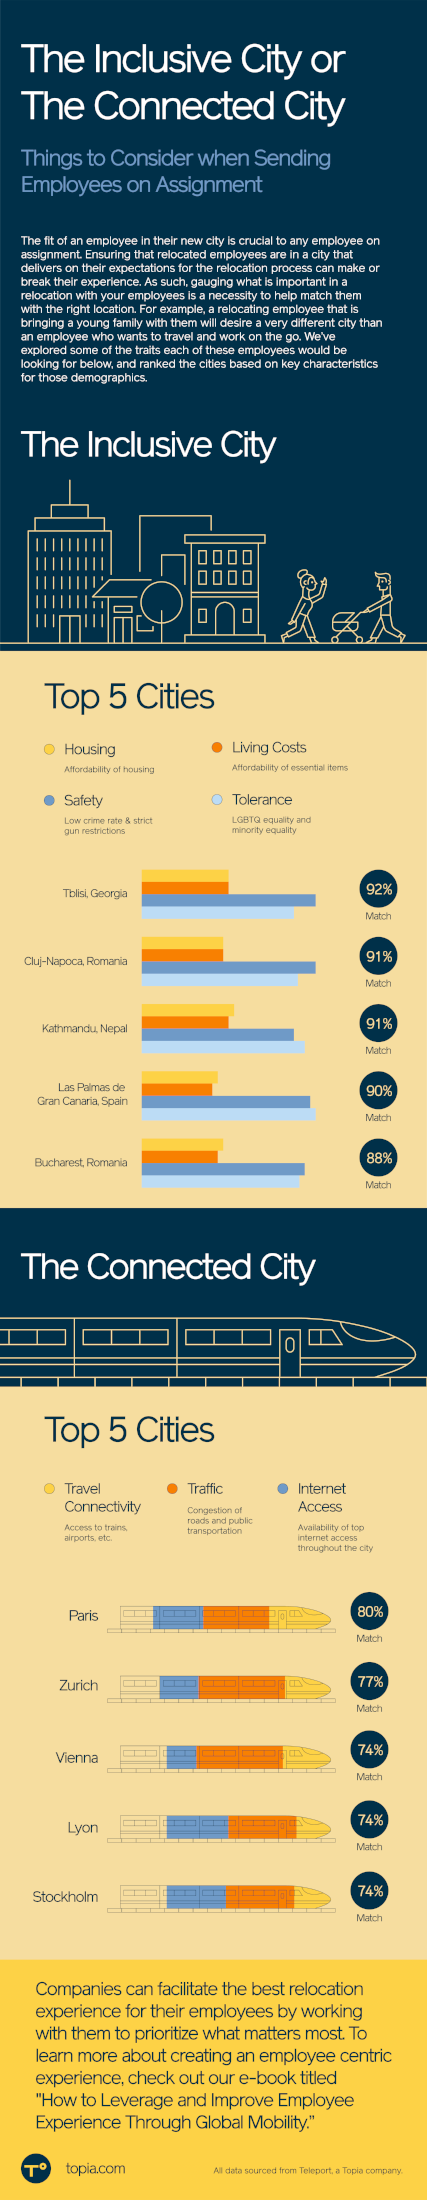 Infographic - The Inclusive vs Connected City